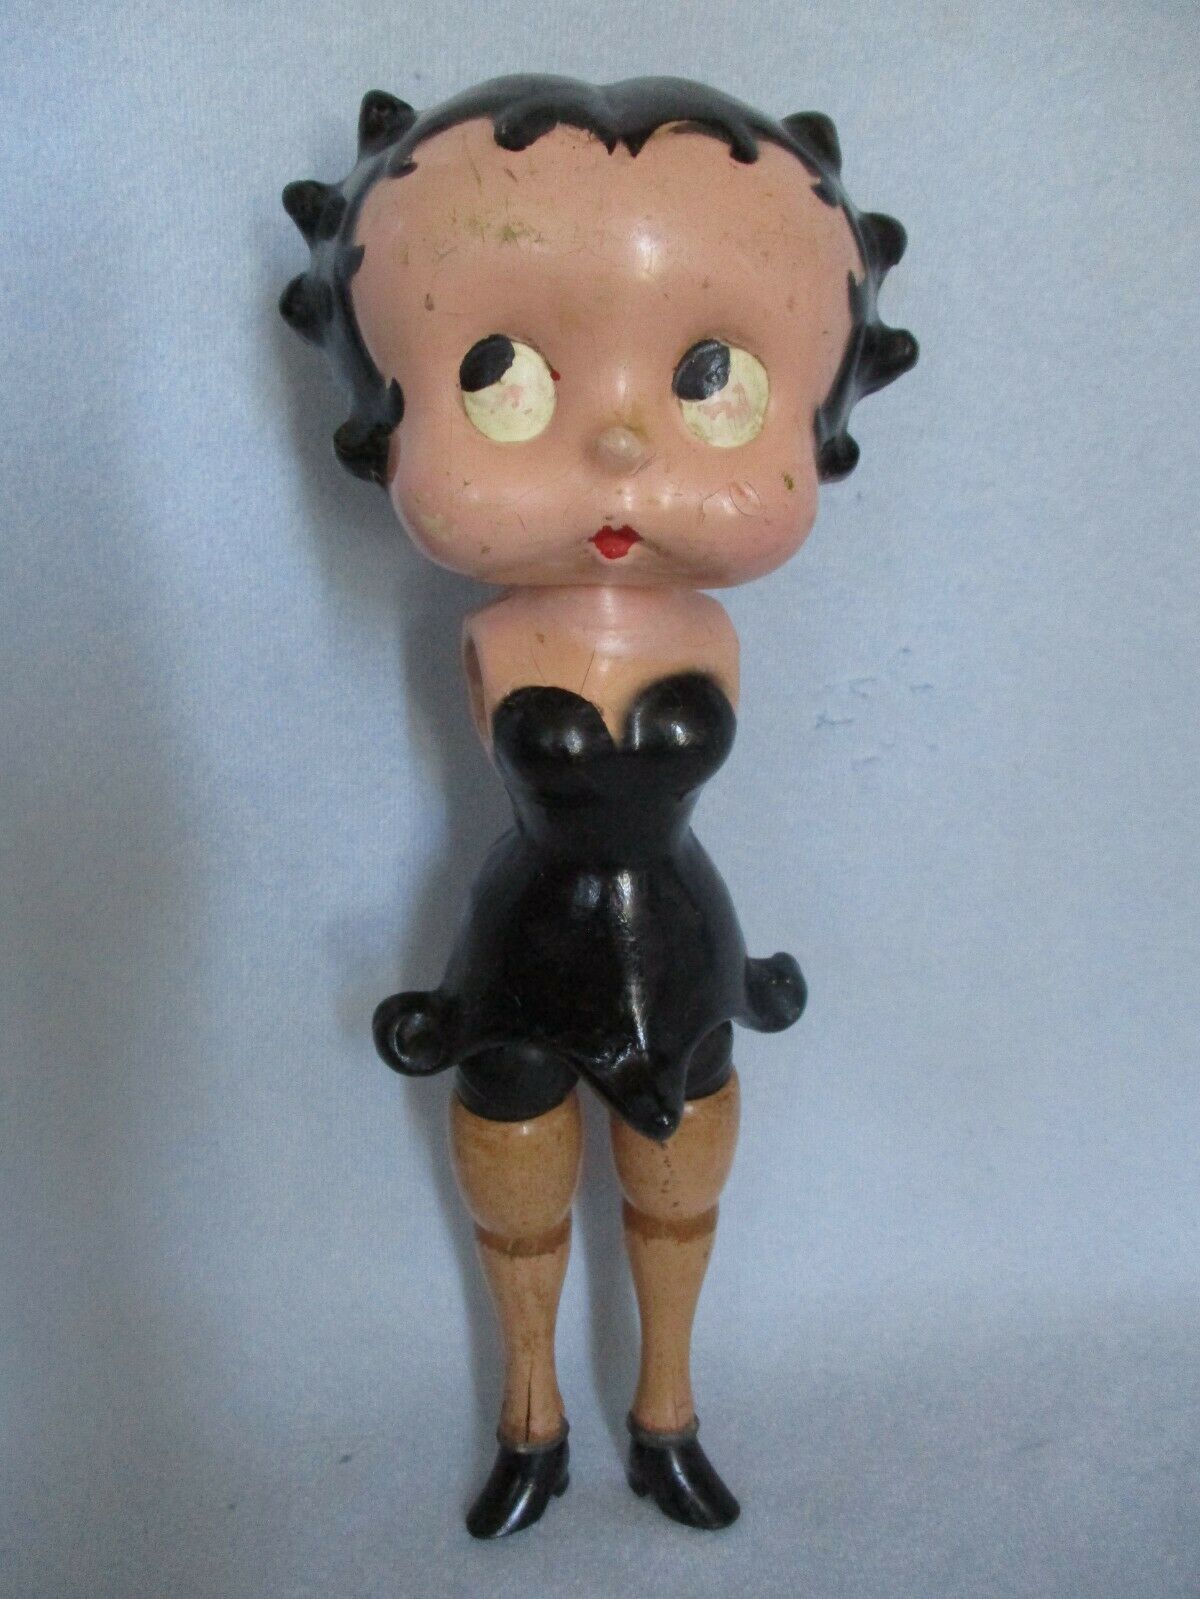 Vintage Composition12” Betty Boop Doll - 1930s